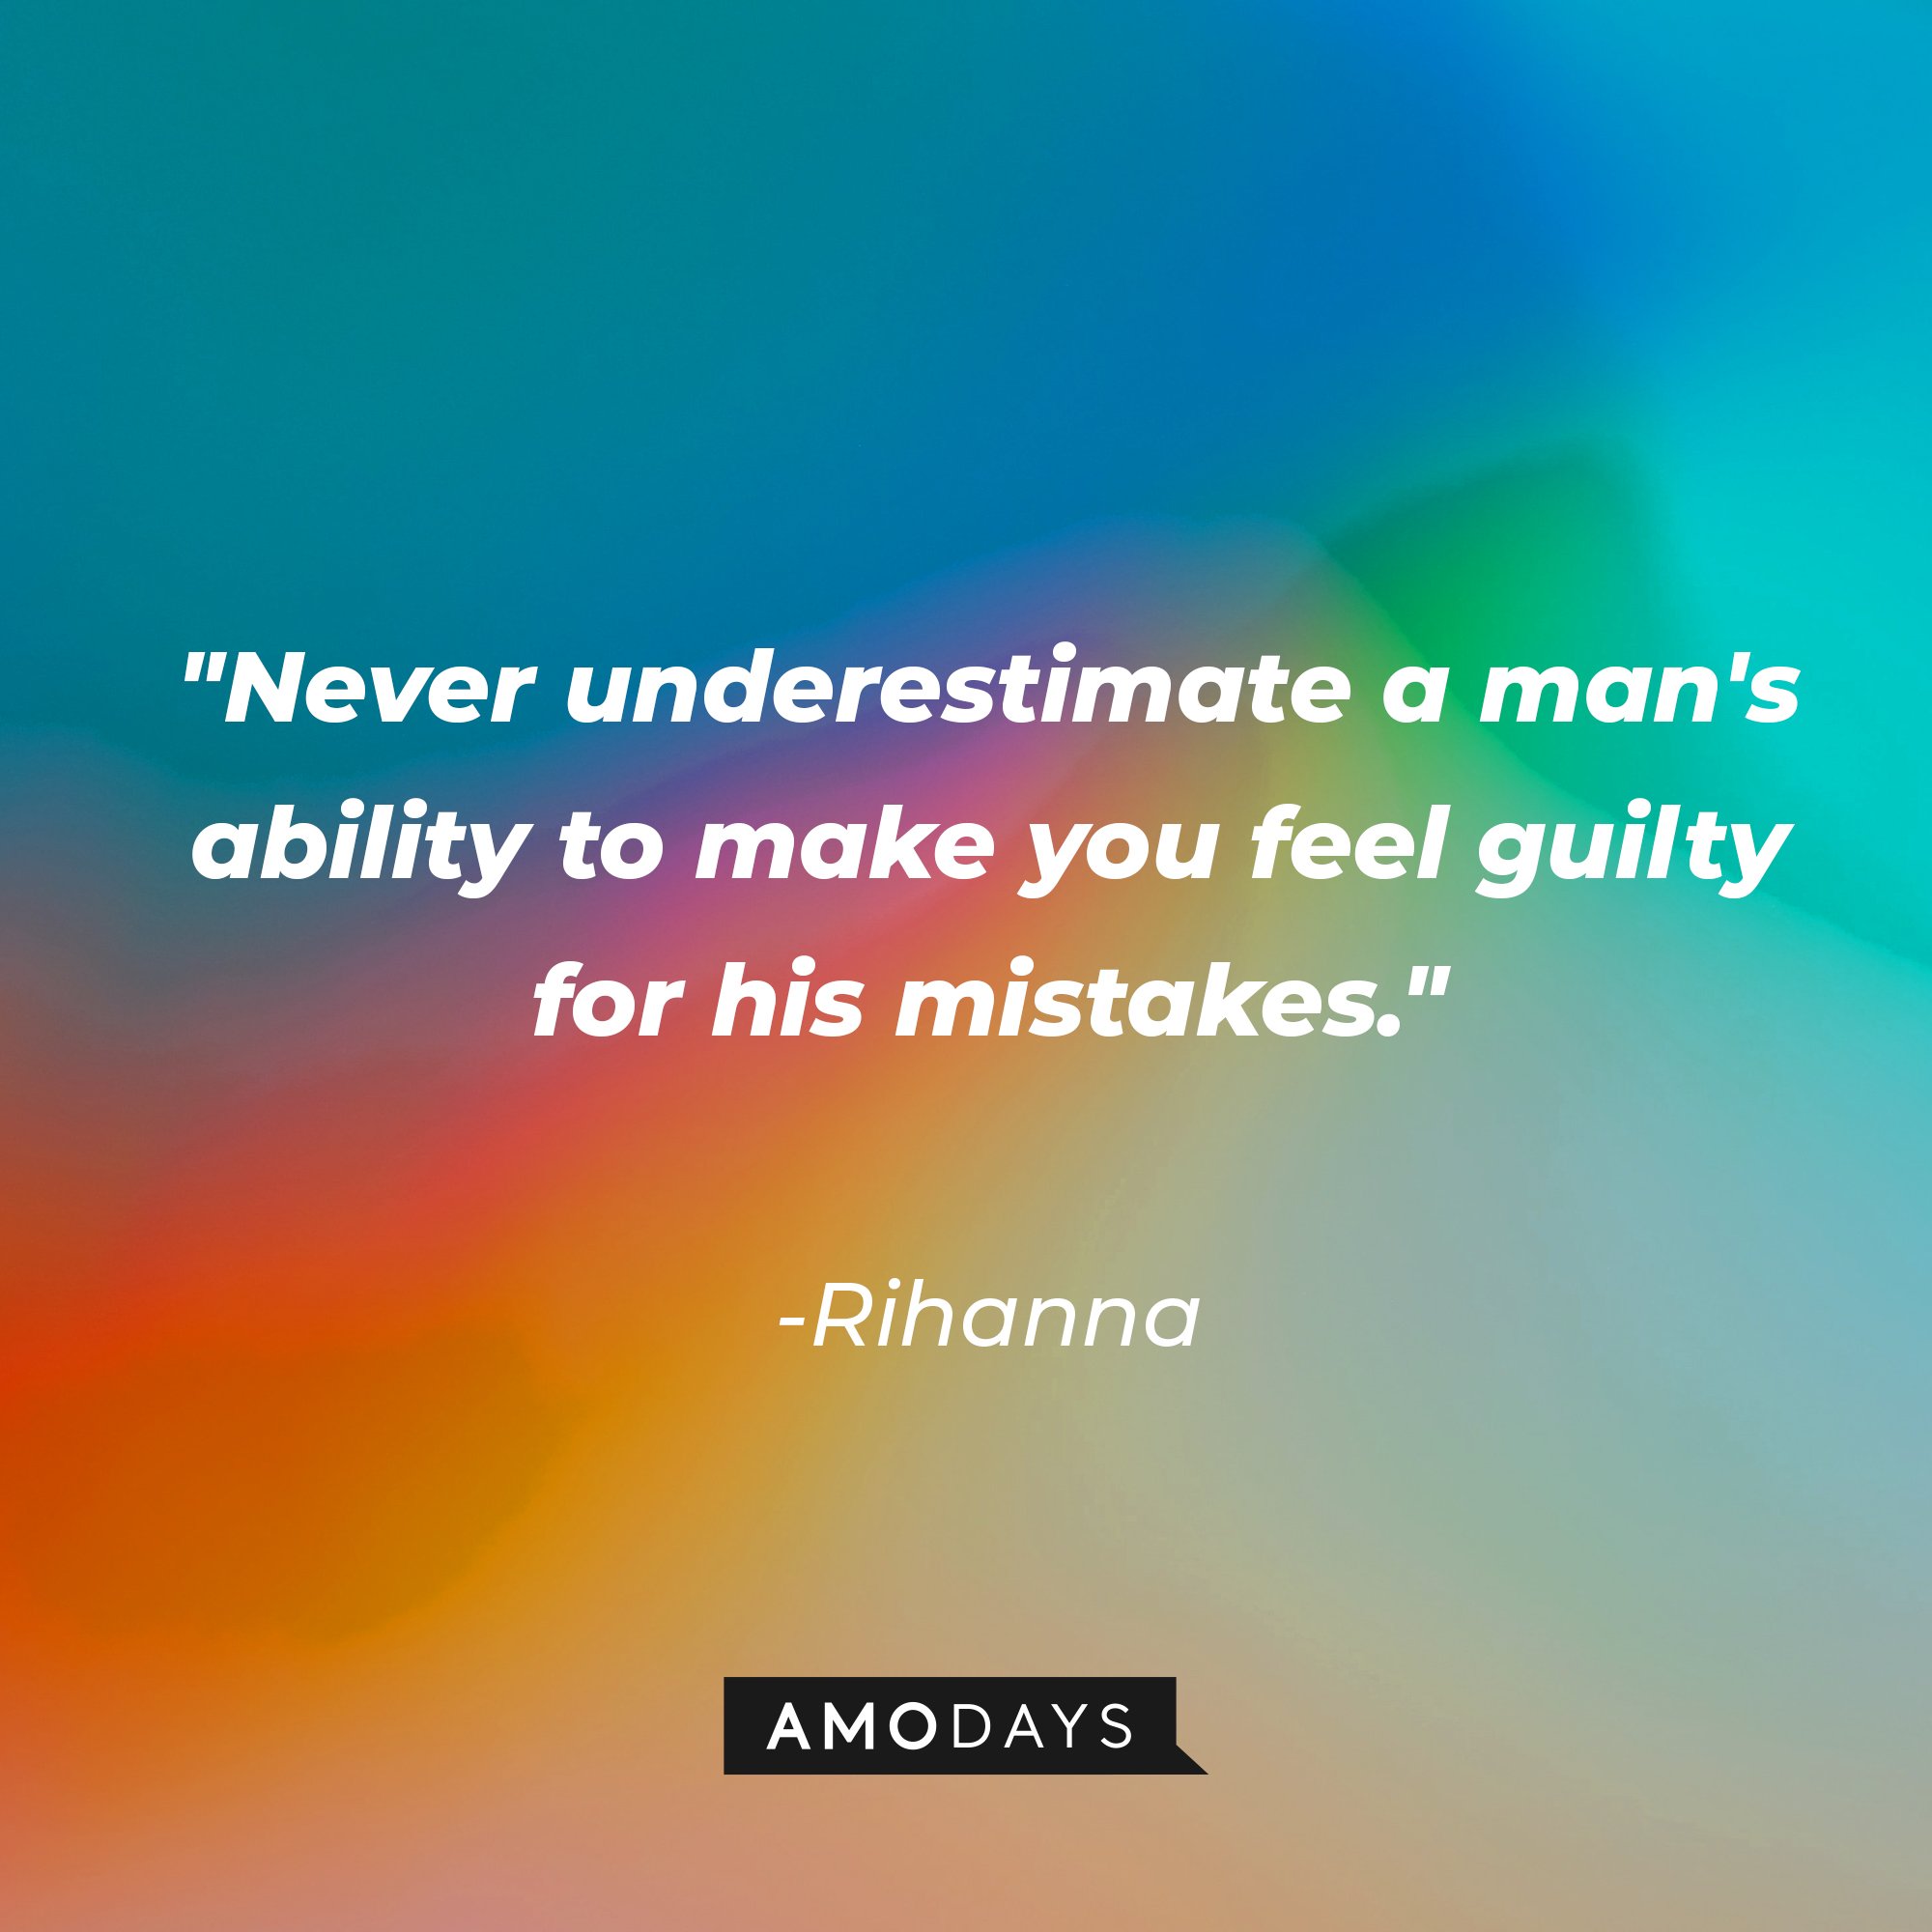 Rihanna's quote: "Never underestimate a man's ability to make you feel guilty for his mistakes." | Image: AmoDays